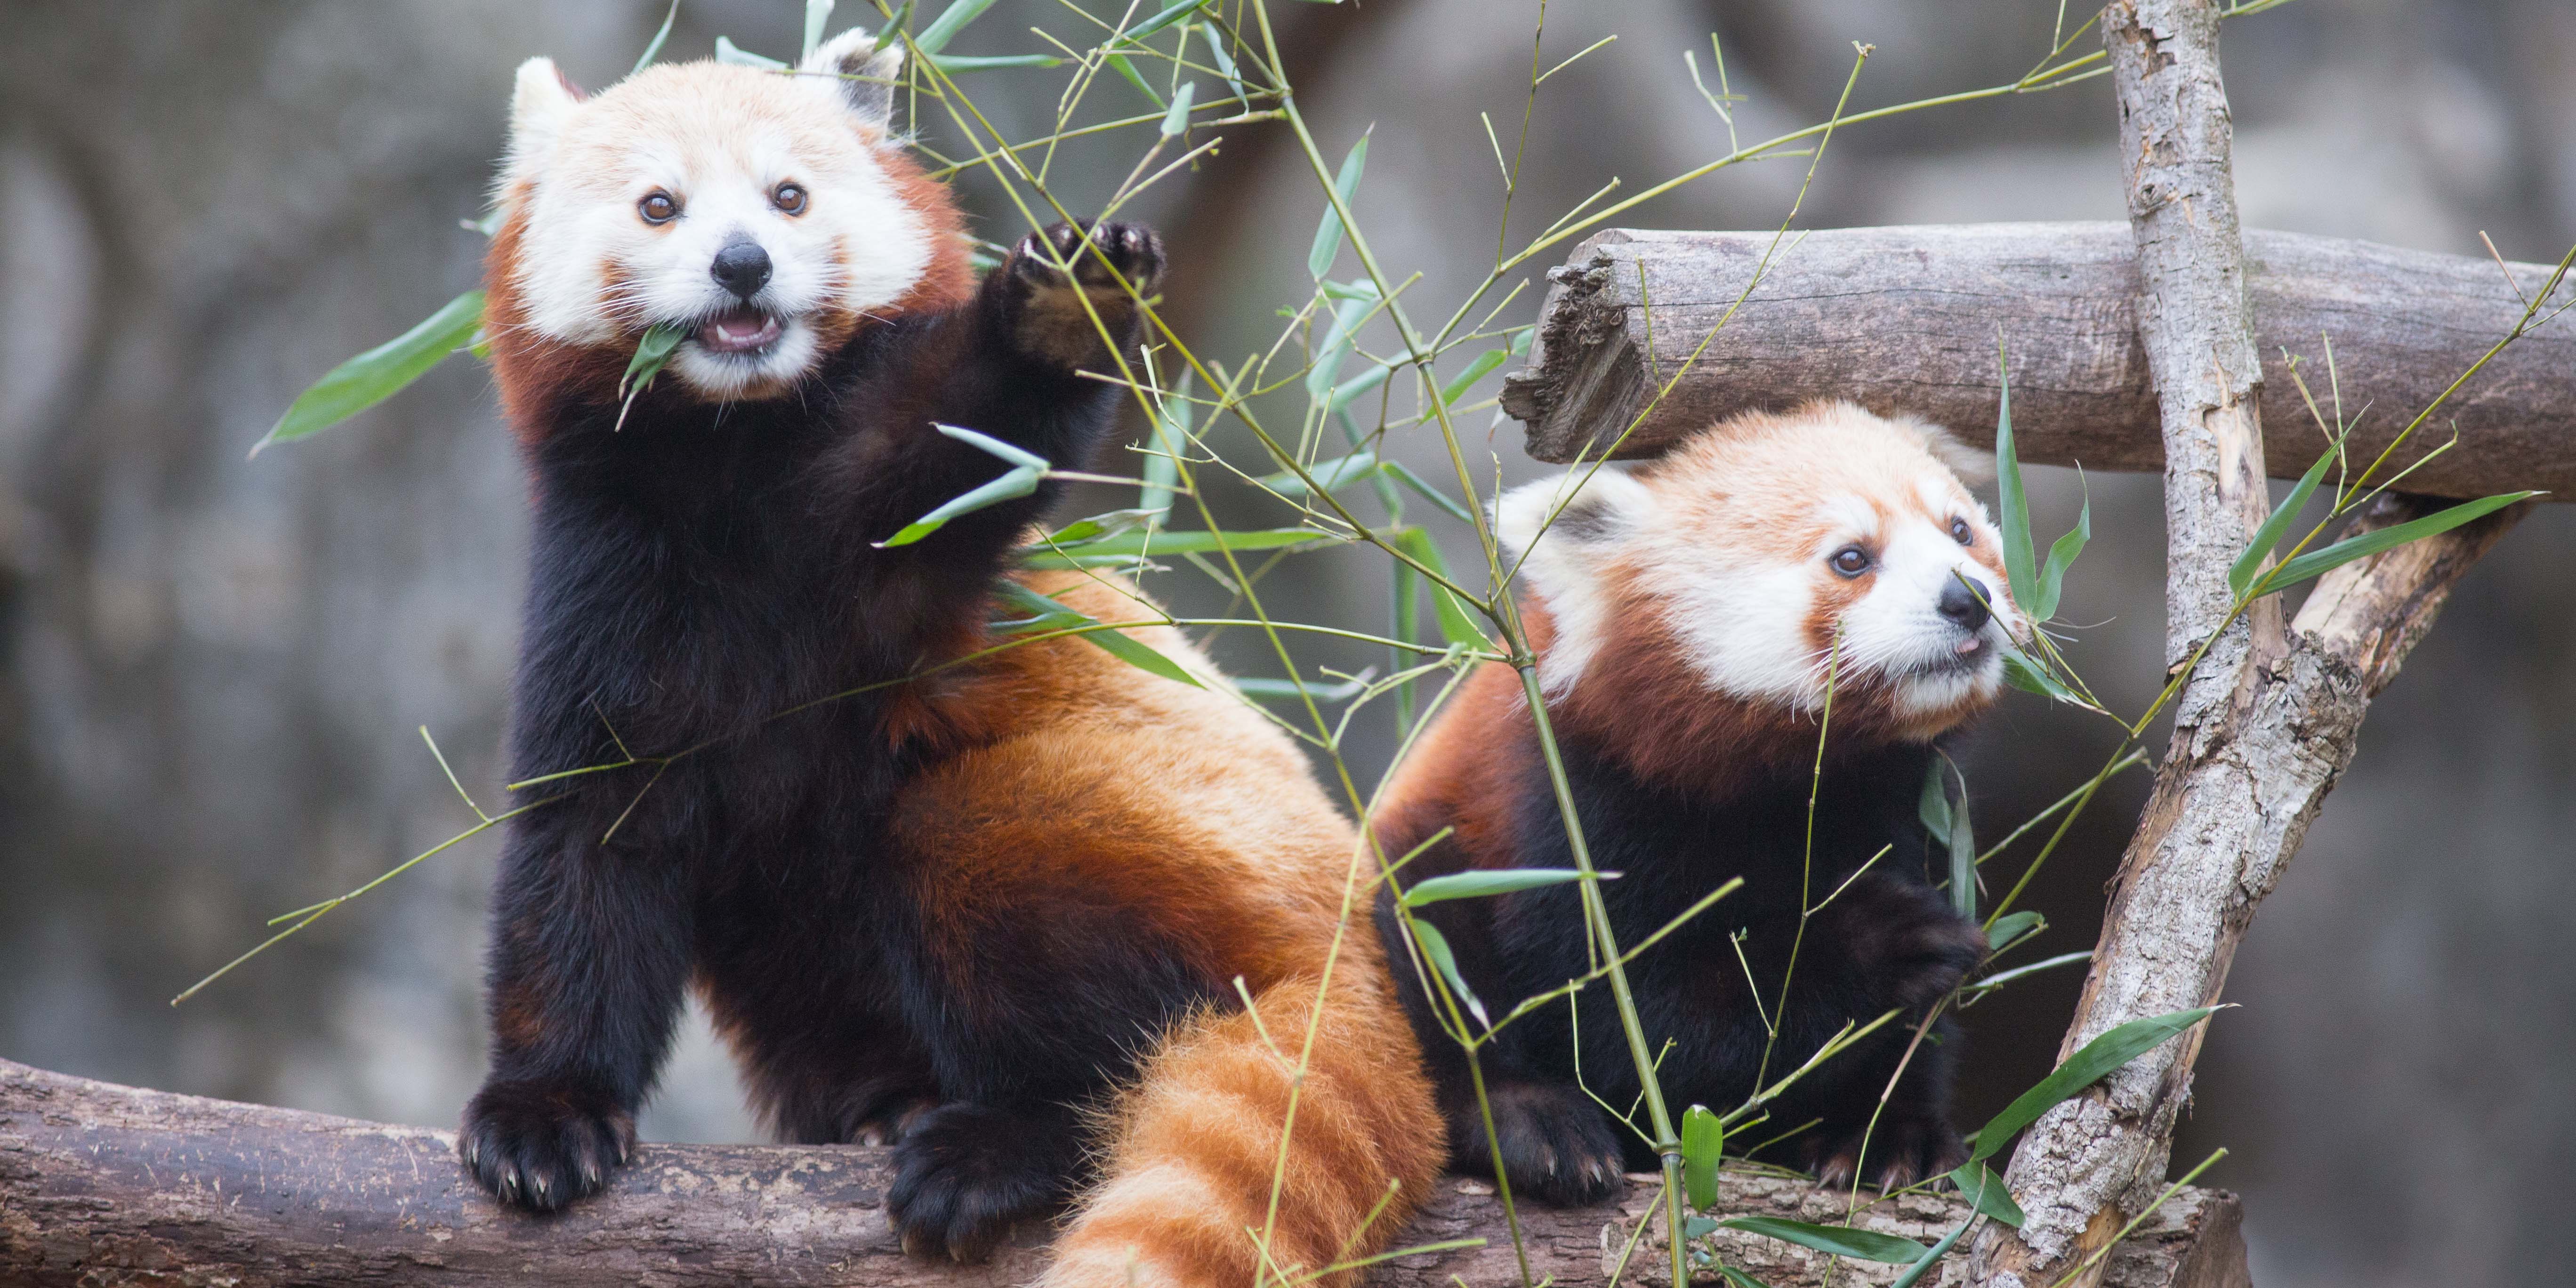 Red pandas on exhibit at Asia Trail